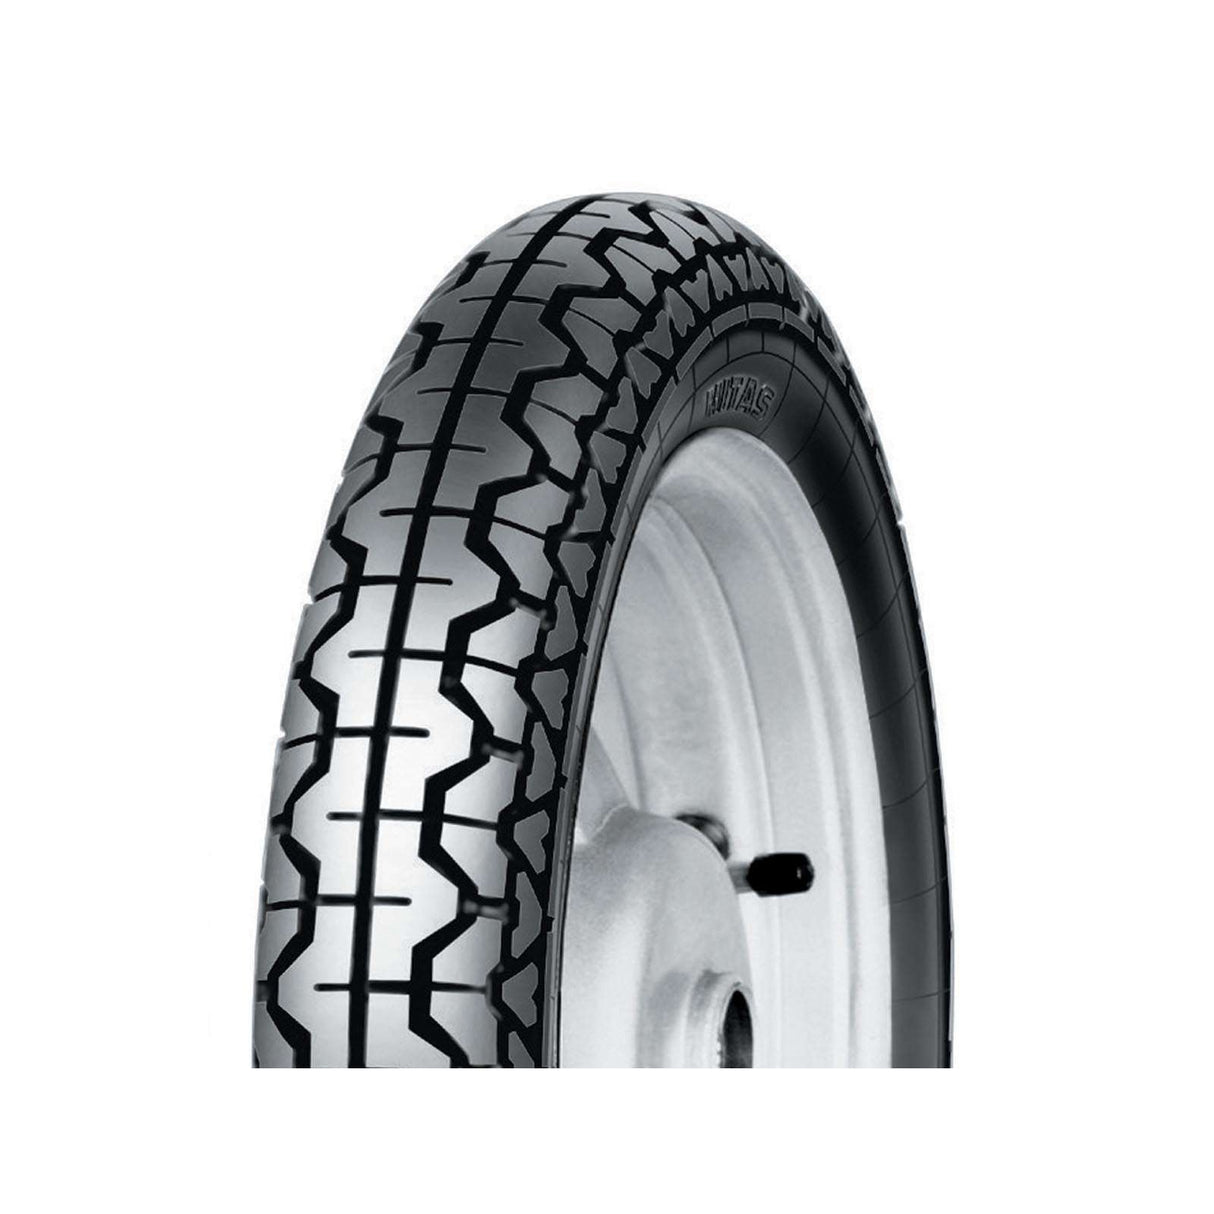 3.50-16 H06 Classic Reinf. Mitas Highway Tyre